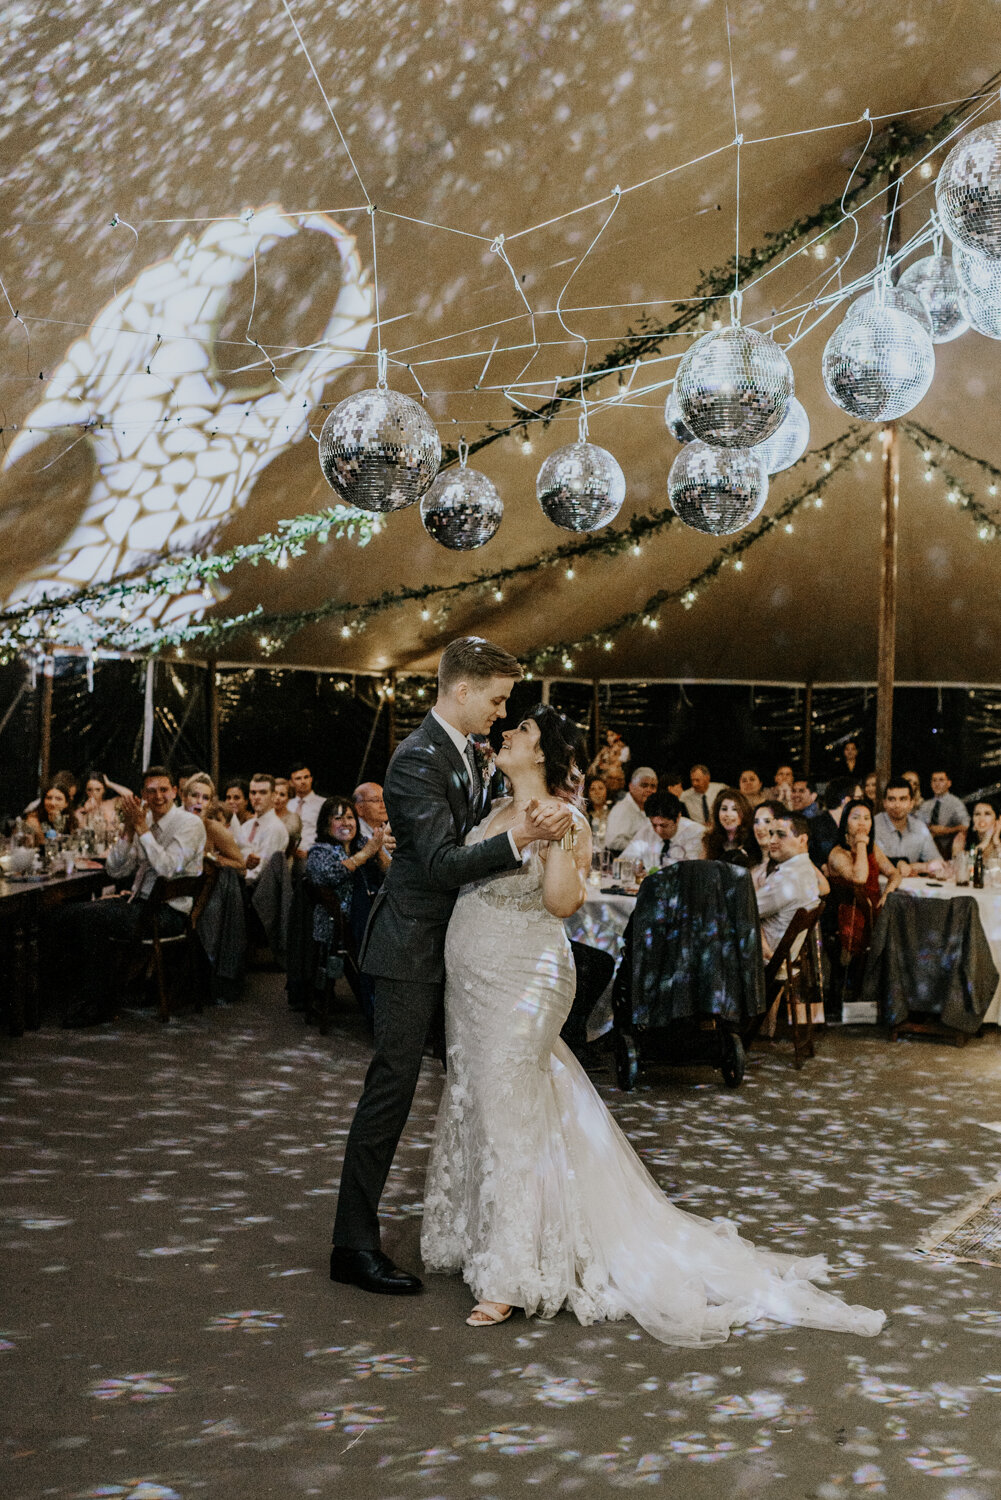 Bride and Groom, First Dance, Intimate Wedding Reception in Austin, Texas